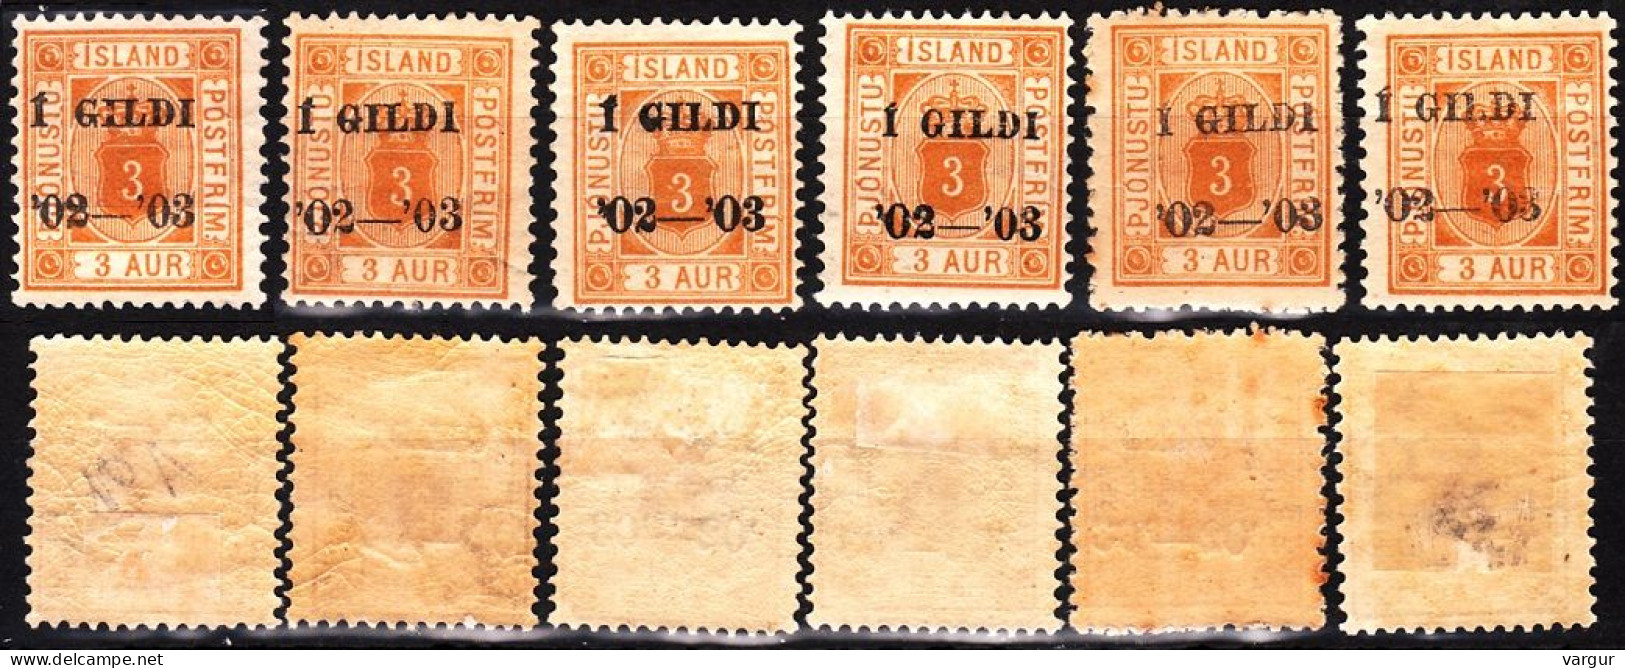 ICELAND / ISLAND Postage Due 1902 Overprints On 3A, Perf 12 3/4. 6 Copies, MH - Service